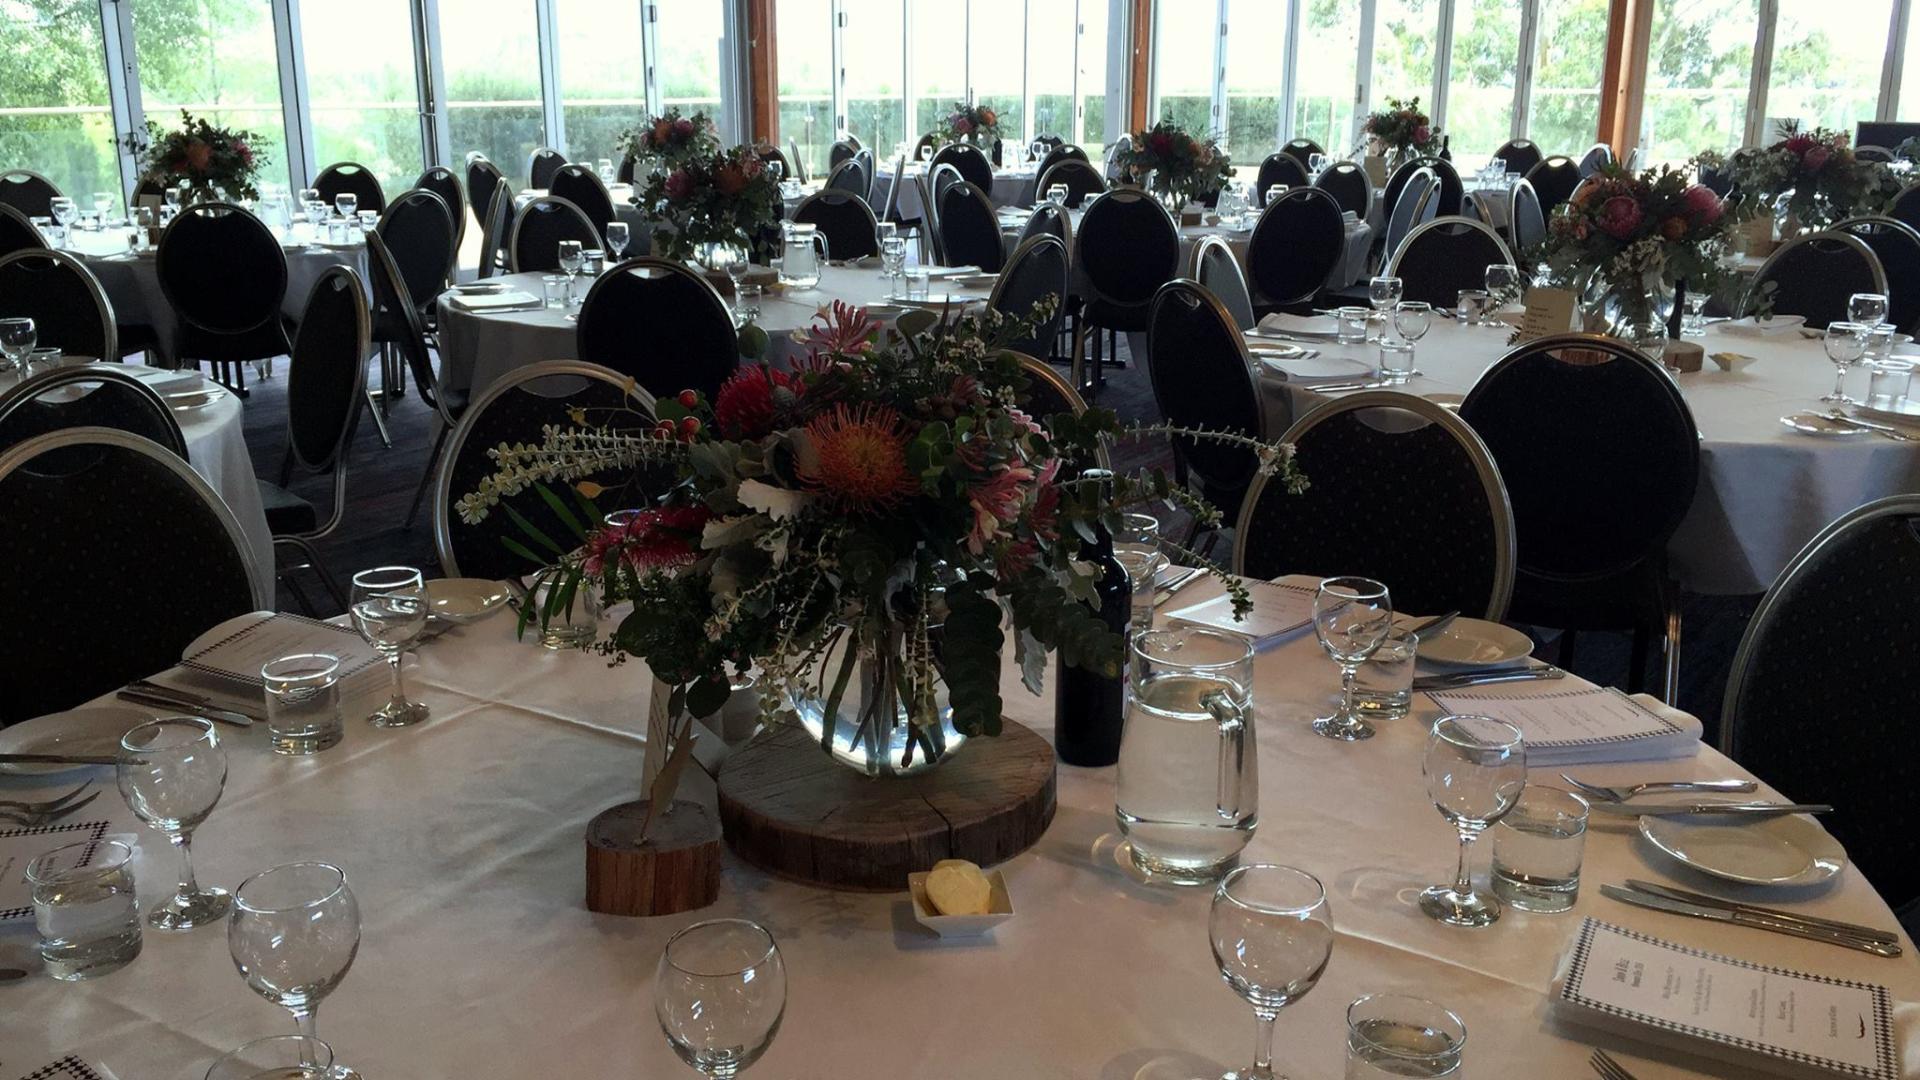 Wedding Venues for Hire in the Western Suburbs